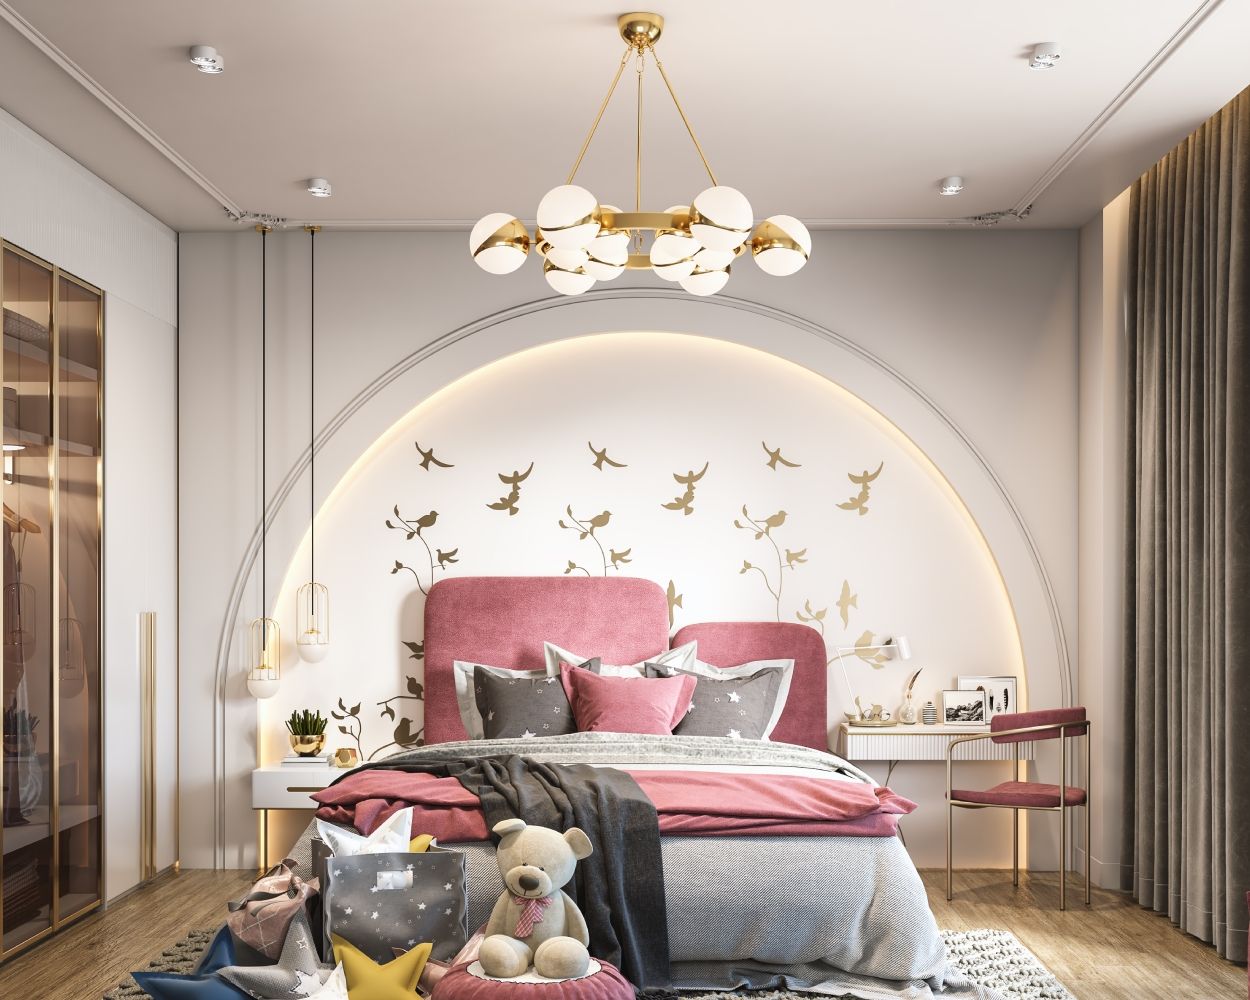 Art Deco Bedroom Wall Design With Arch And Wall Niche